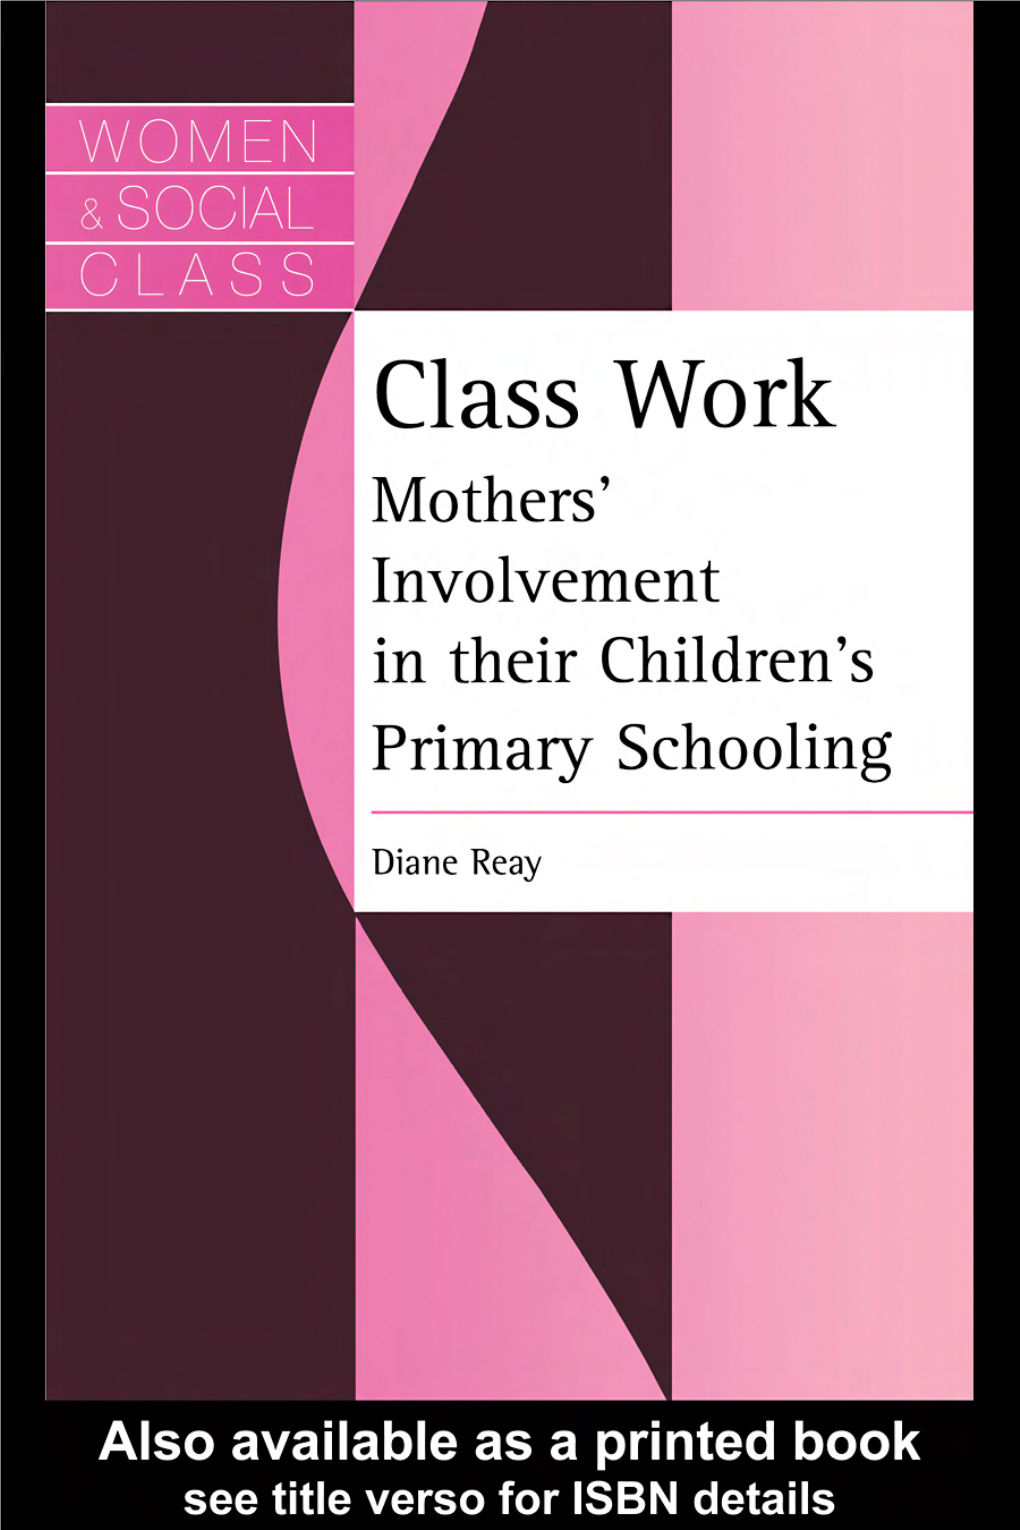 Class Work: Mothers' Involvement in Their Children's Primary Schooling